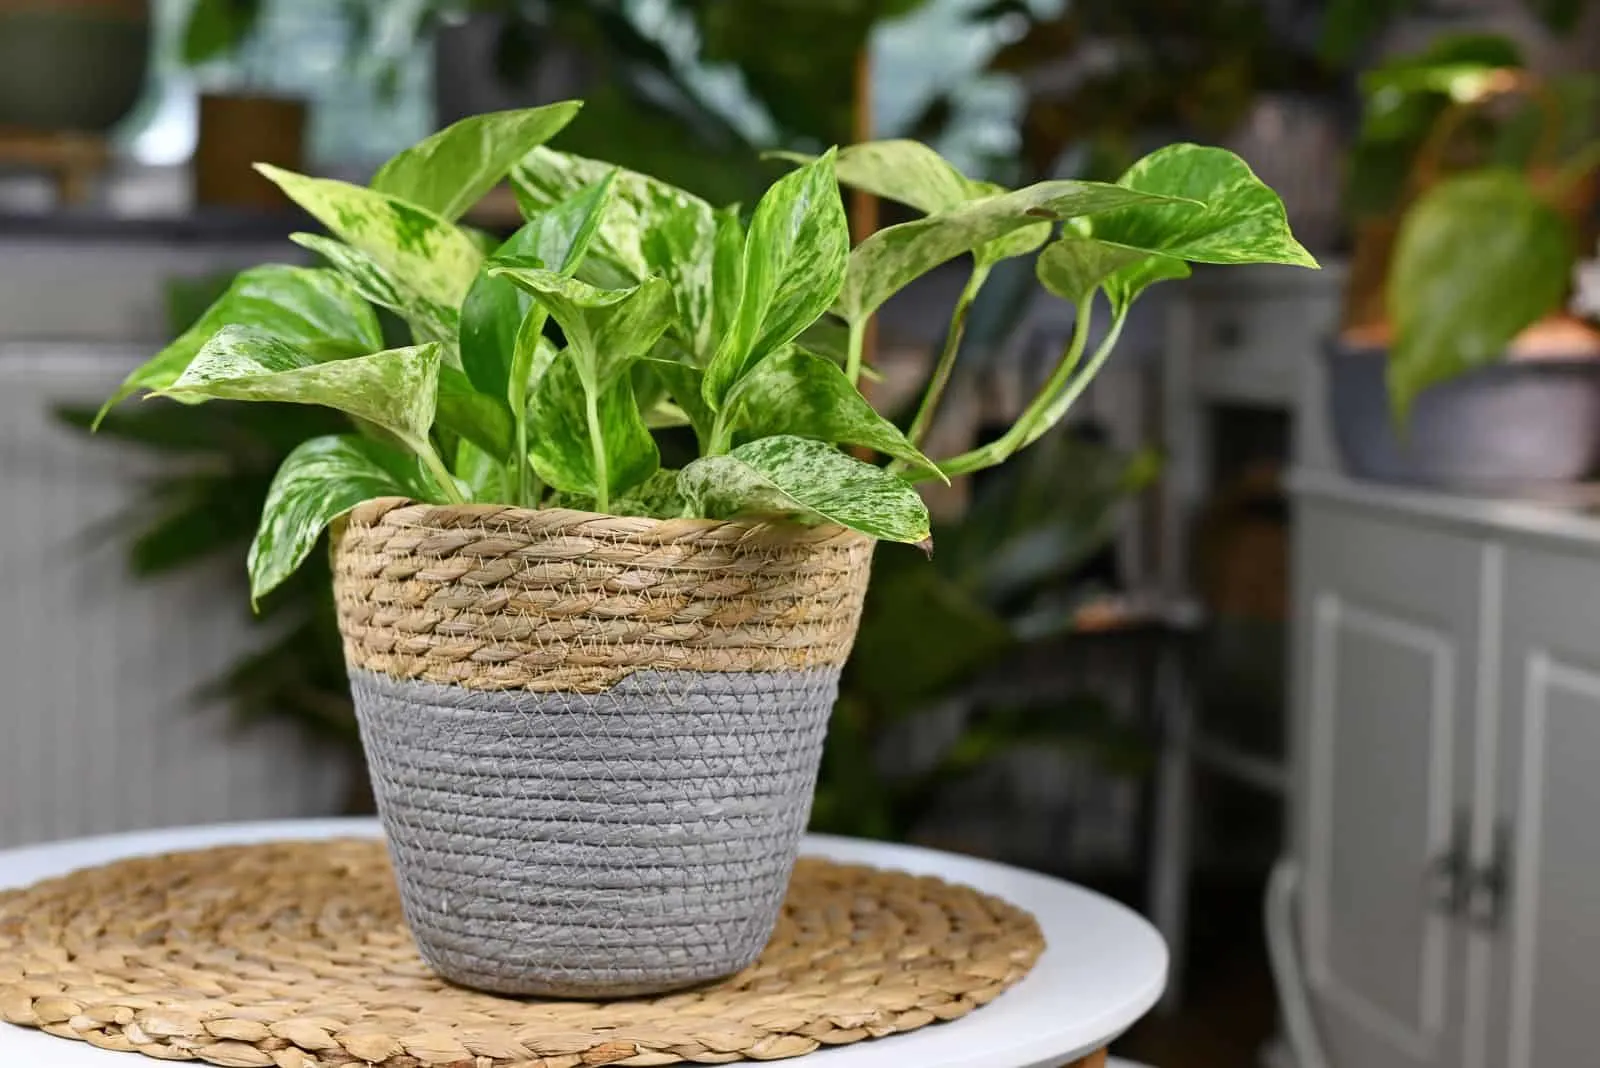 Pothos in a wicker pot on the table